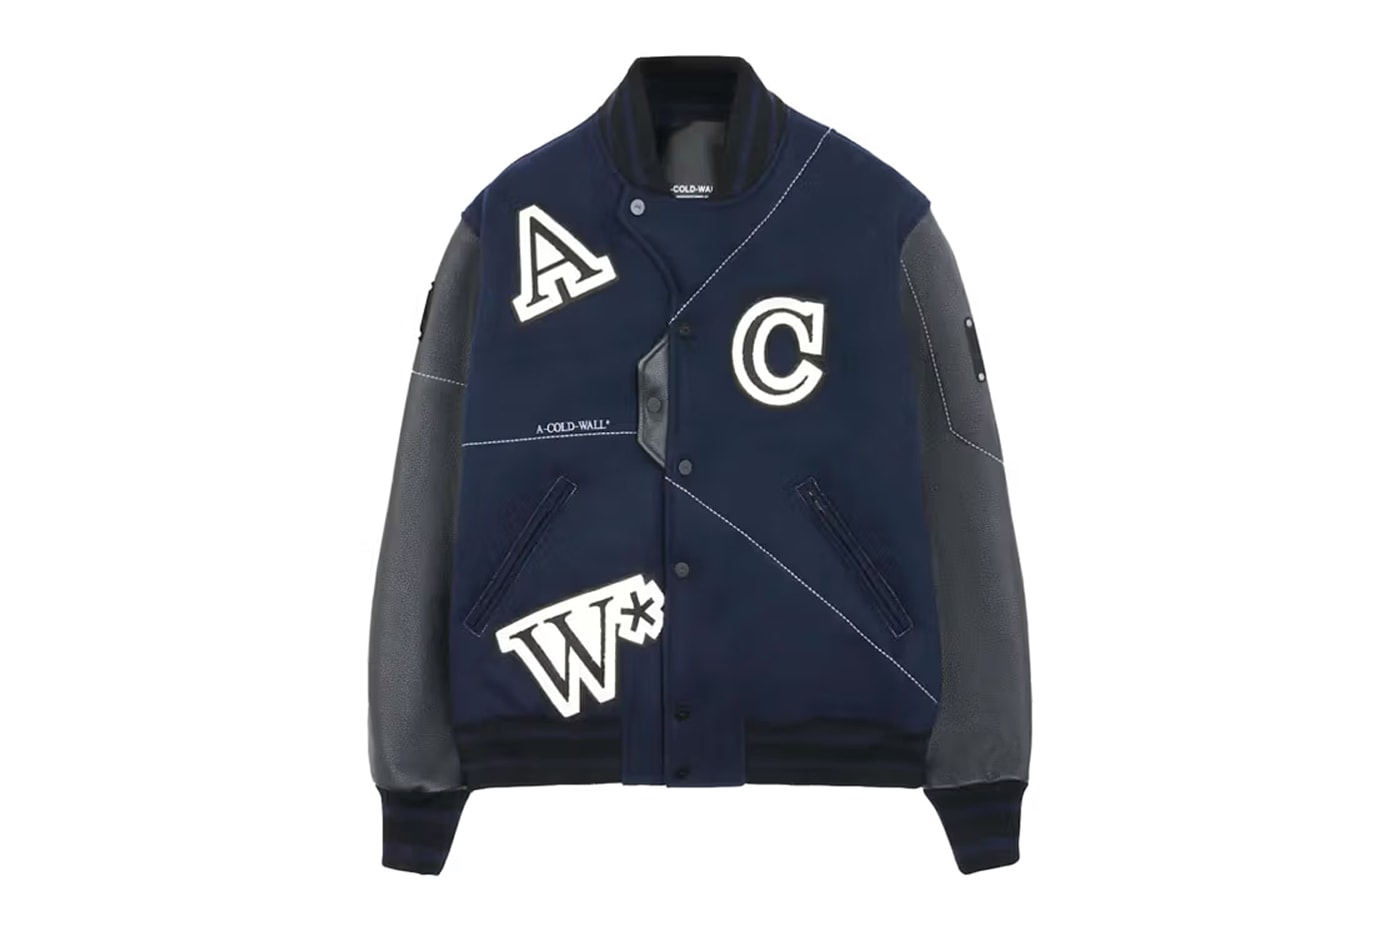 A-COLD-WALL* Patchwork Bomber Americana Sportswear varsity style jacket pre-fall 2023 collection order online price details wool mix